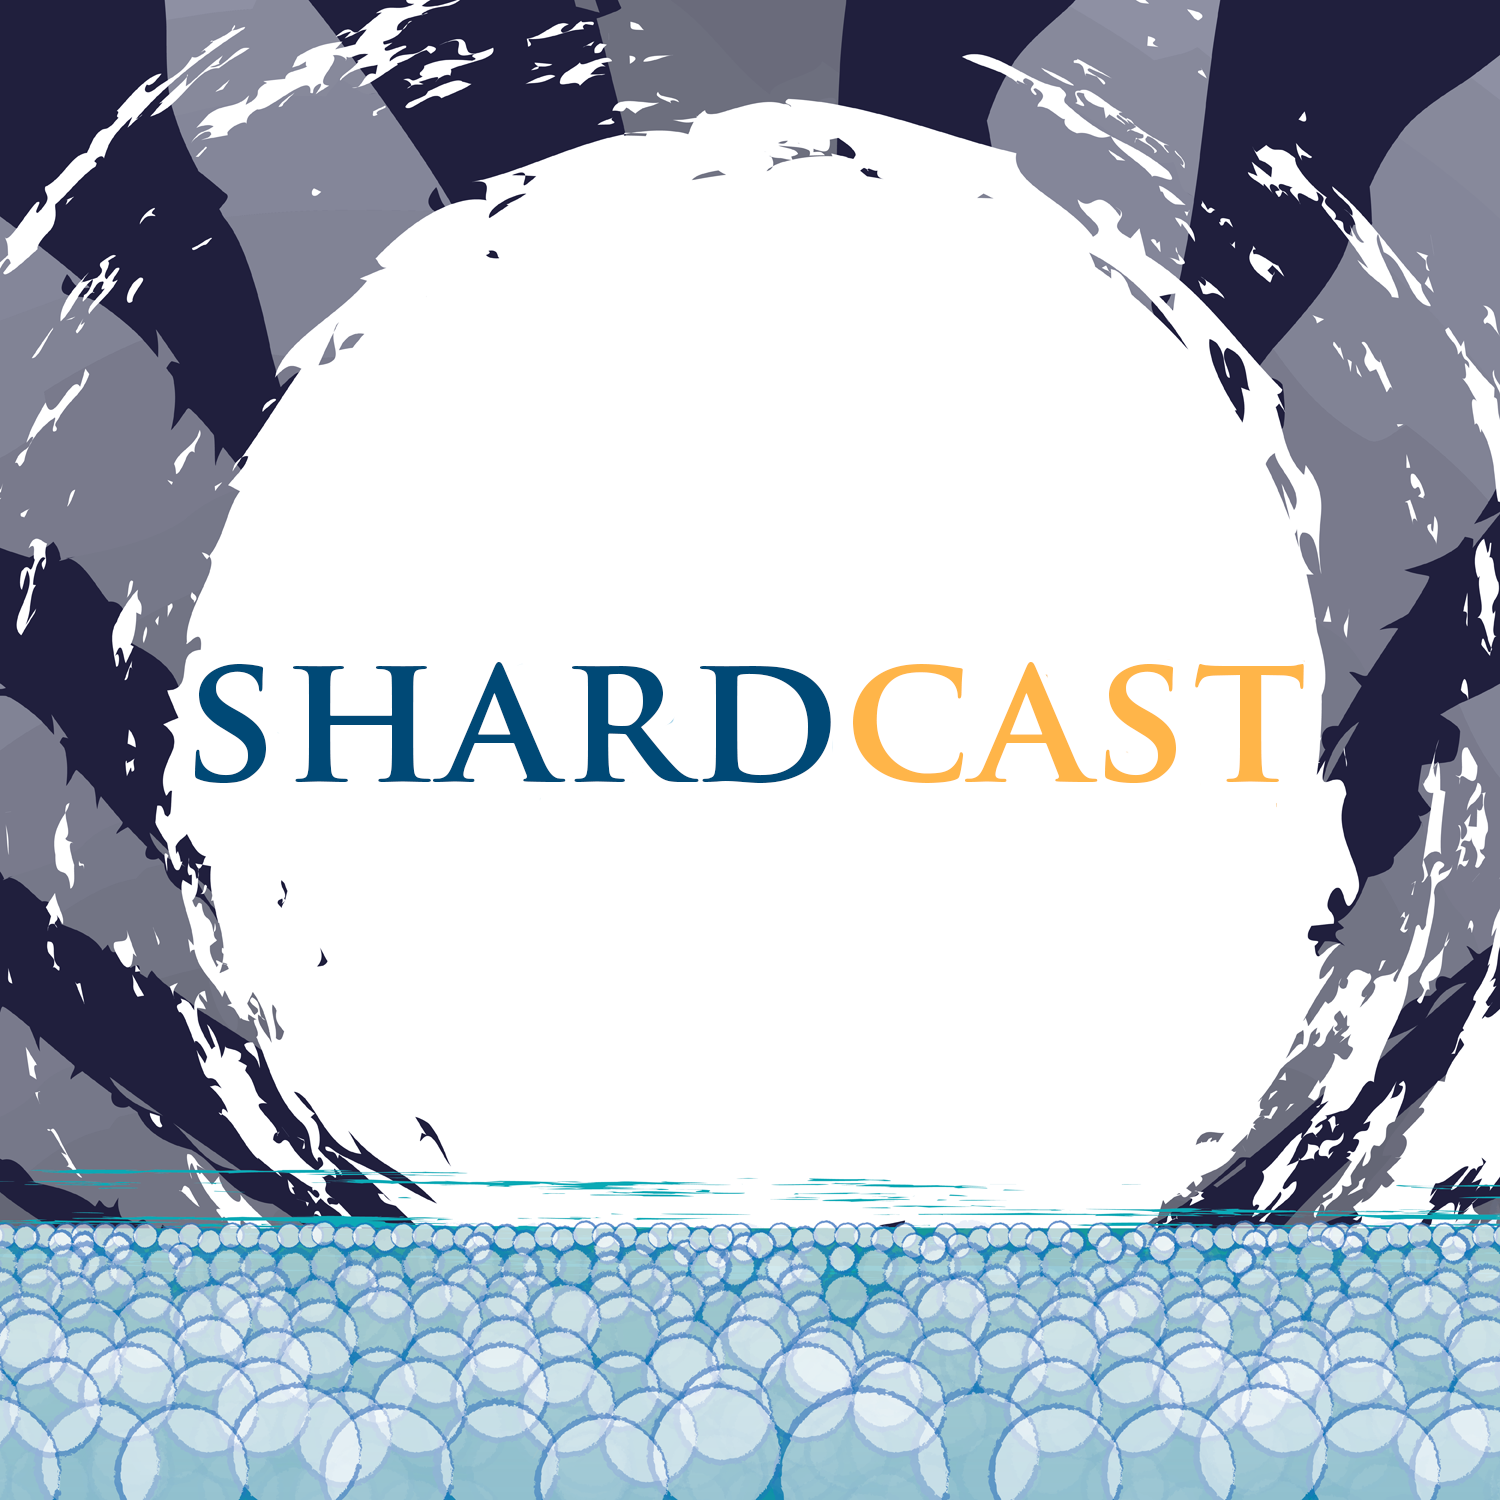 More information about "Shardcast: The Oathpact and Desolations"